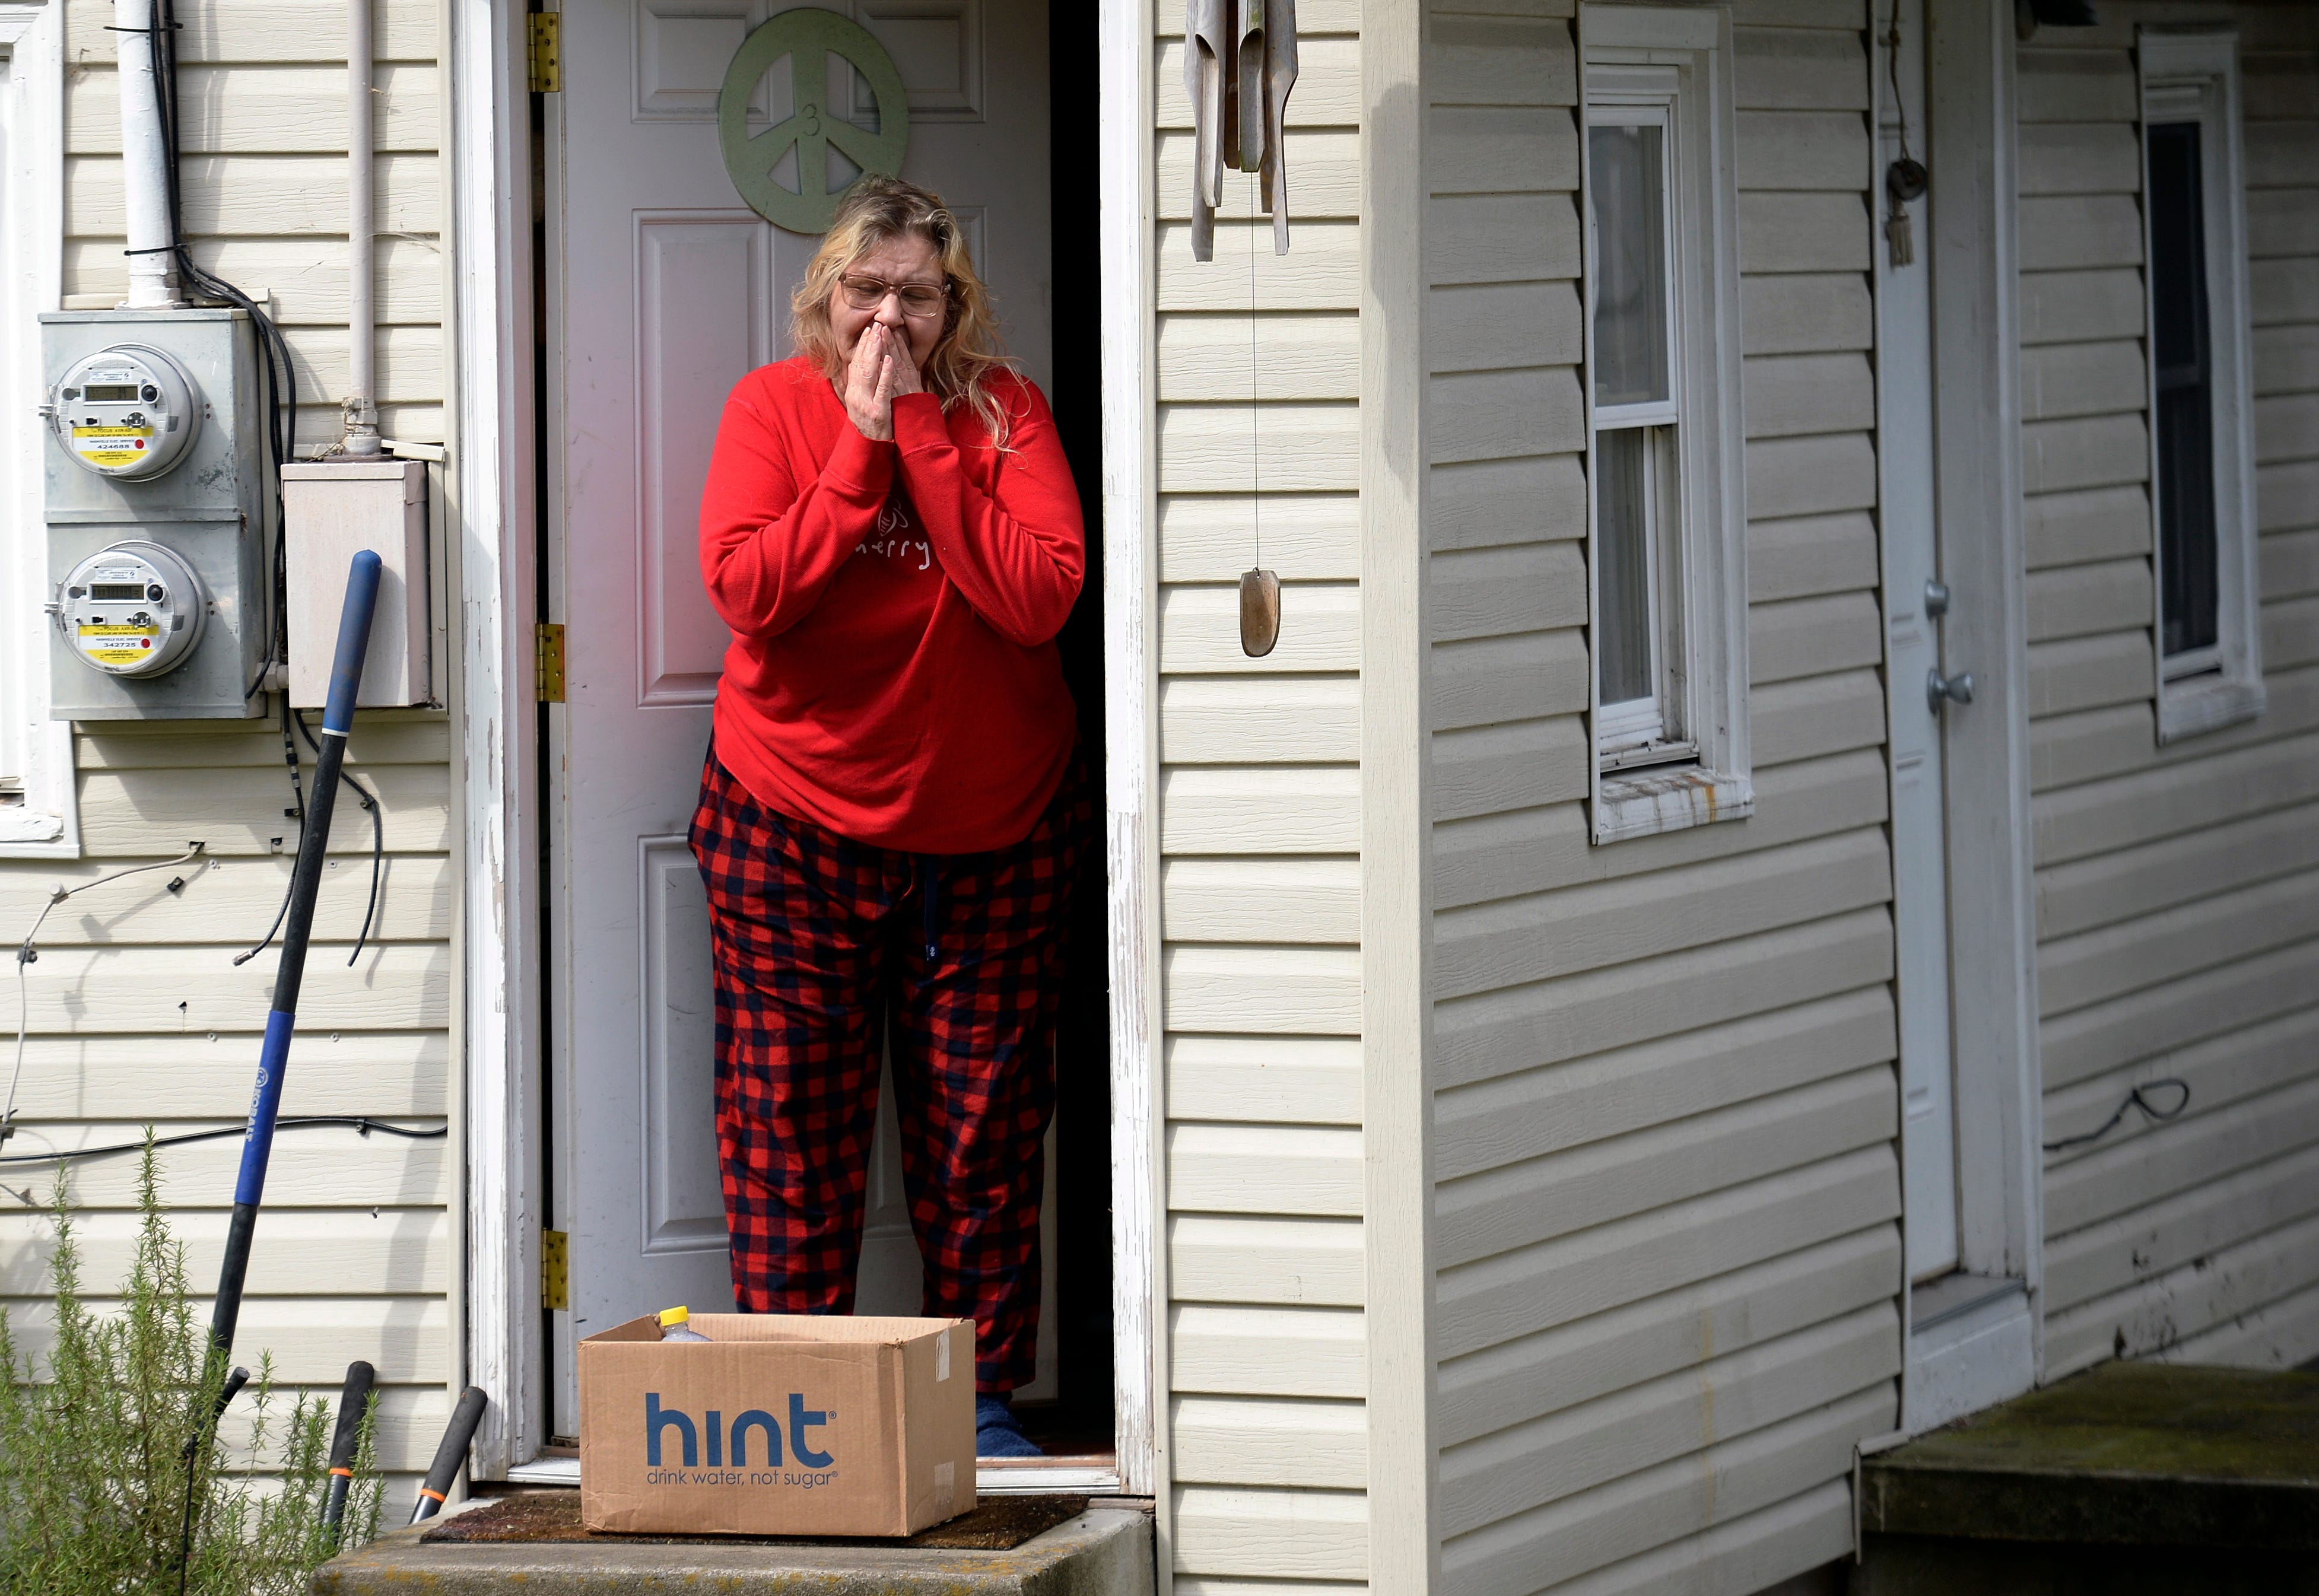 Jennifer Clinger reacts after receiving food and other supplies from Thistle Farms volunteer Levi Hummon on March 26 in Nashville, Tenn. Front Porch Delivery started for current and former Thistle Farm clients after the coronavirus started spreading in Nashville.